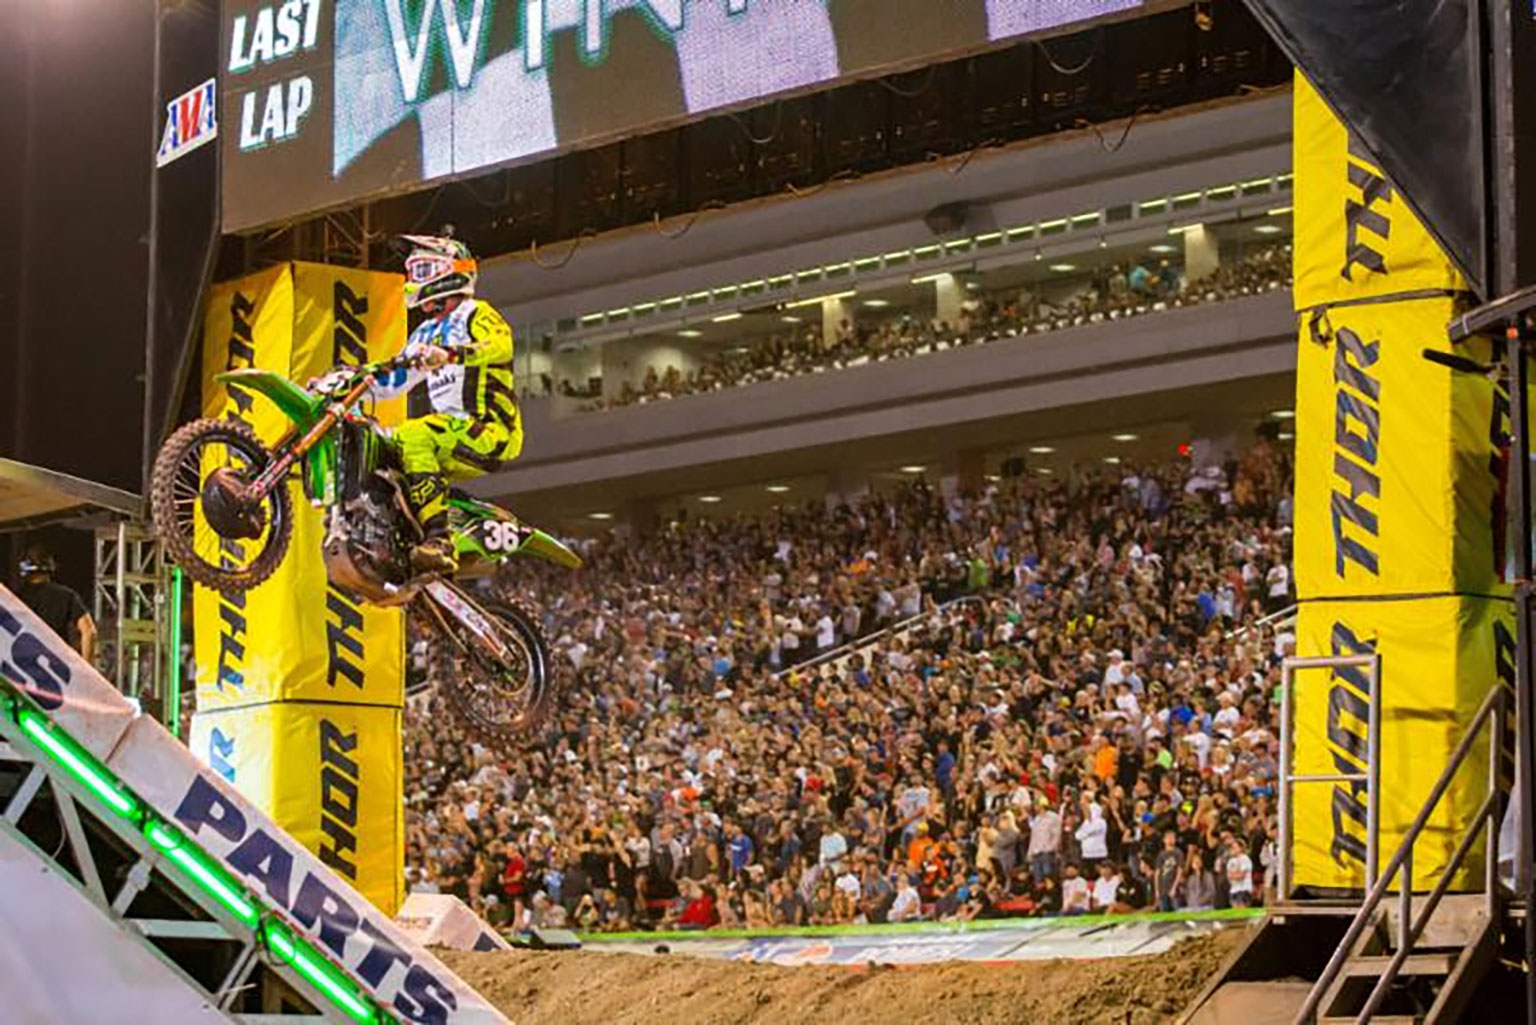 Cianciarulo rages in the 250s